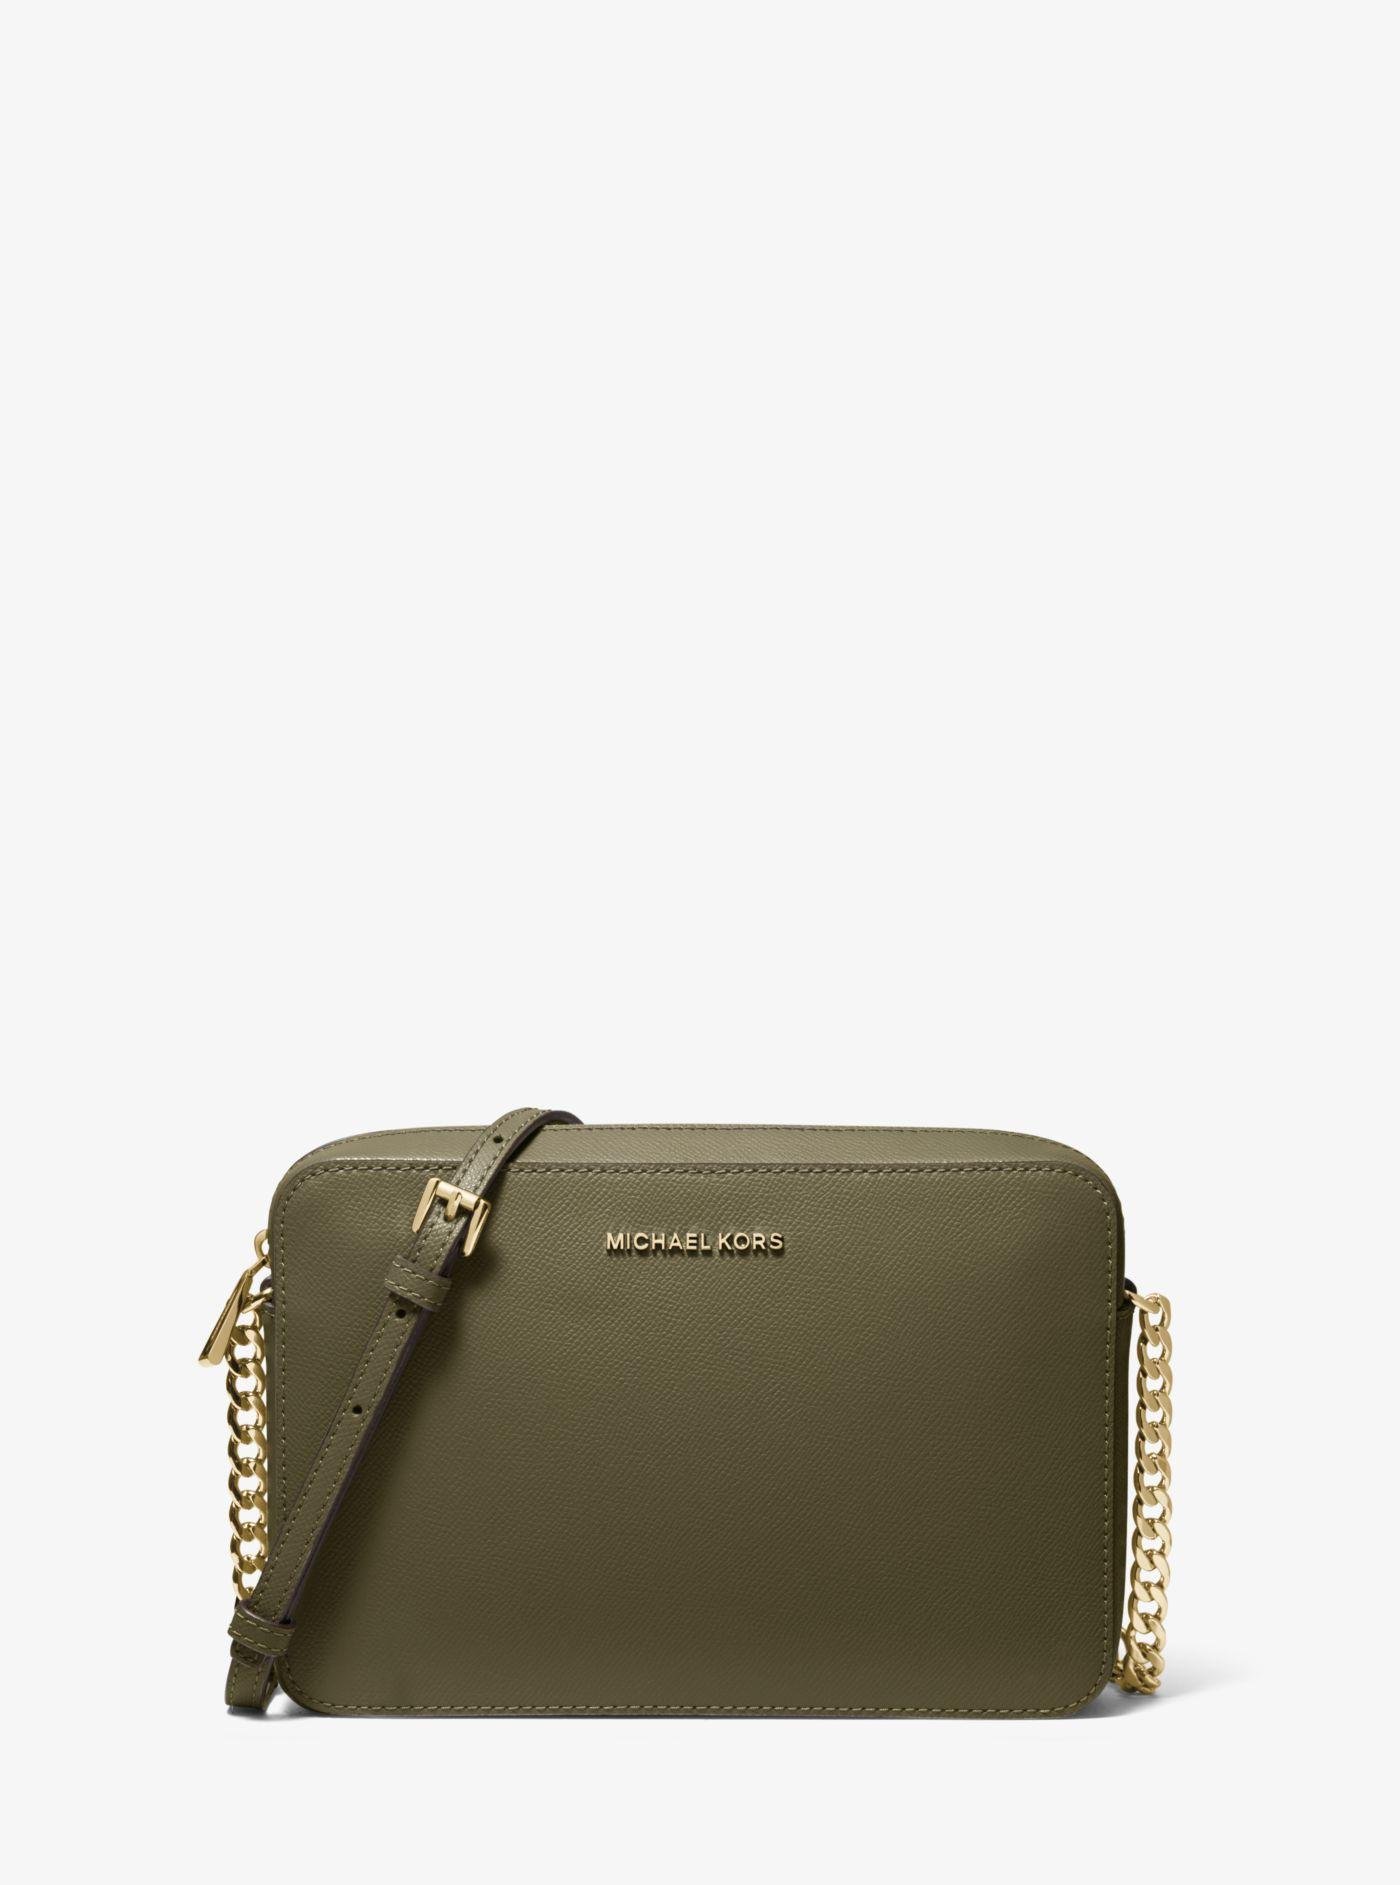 Michael Kors Jet Set Large Saffiano Leather Crossbody Bag in Olive (Green)  - Lyst